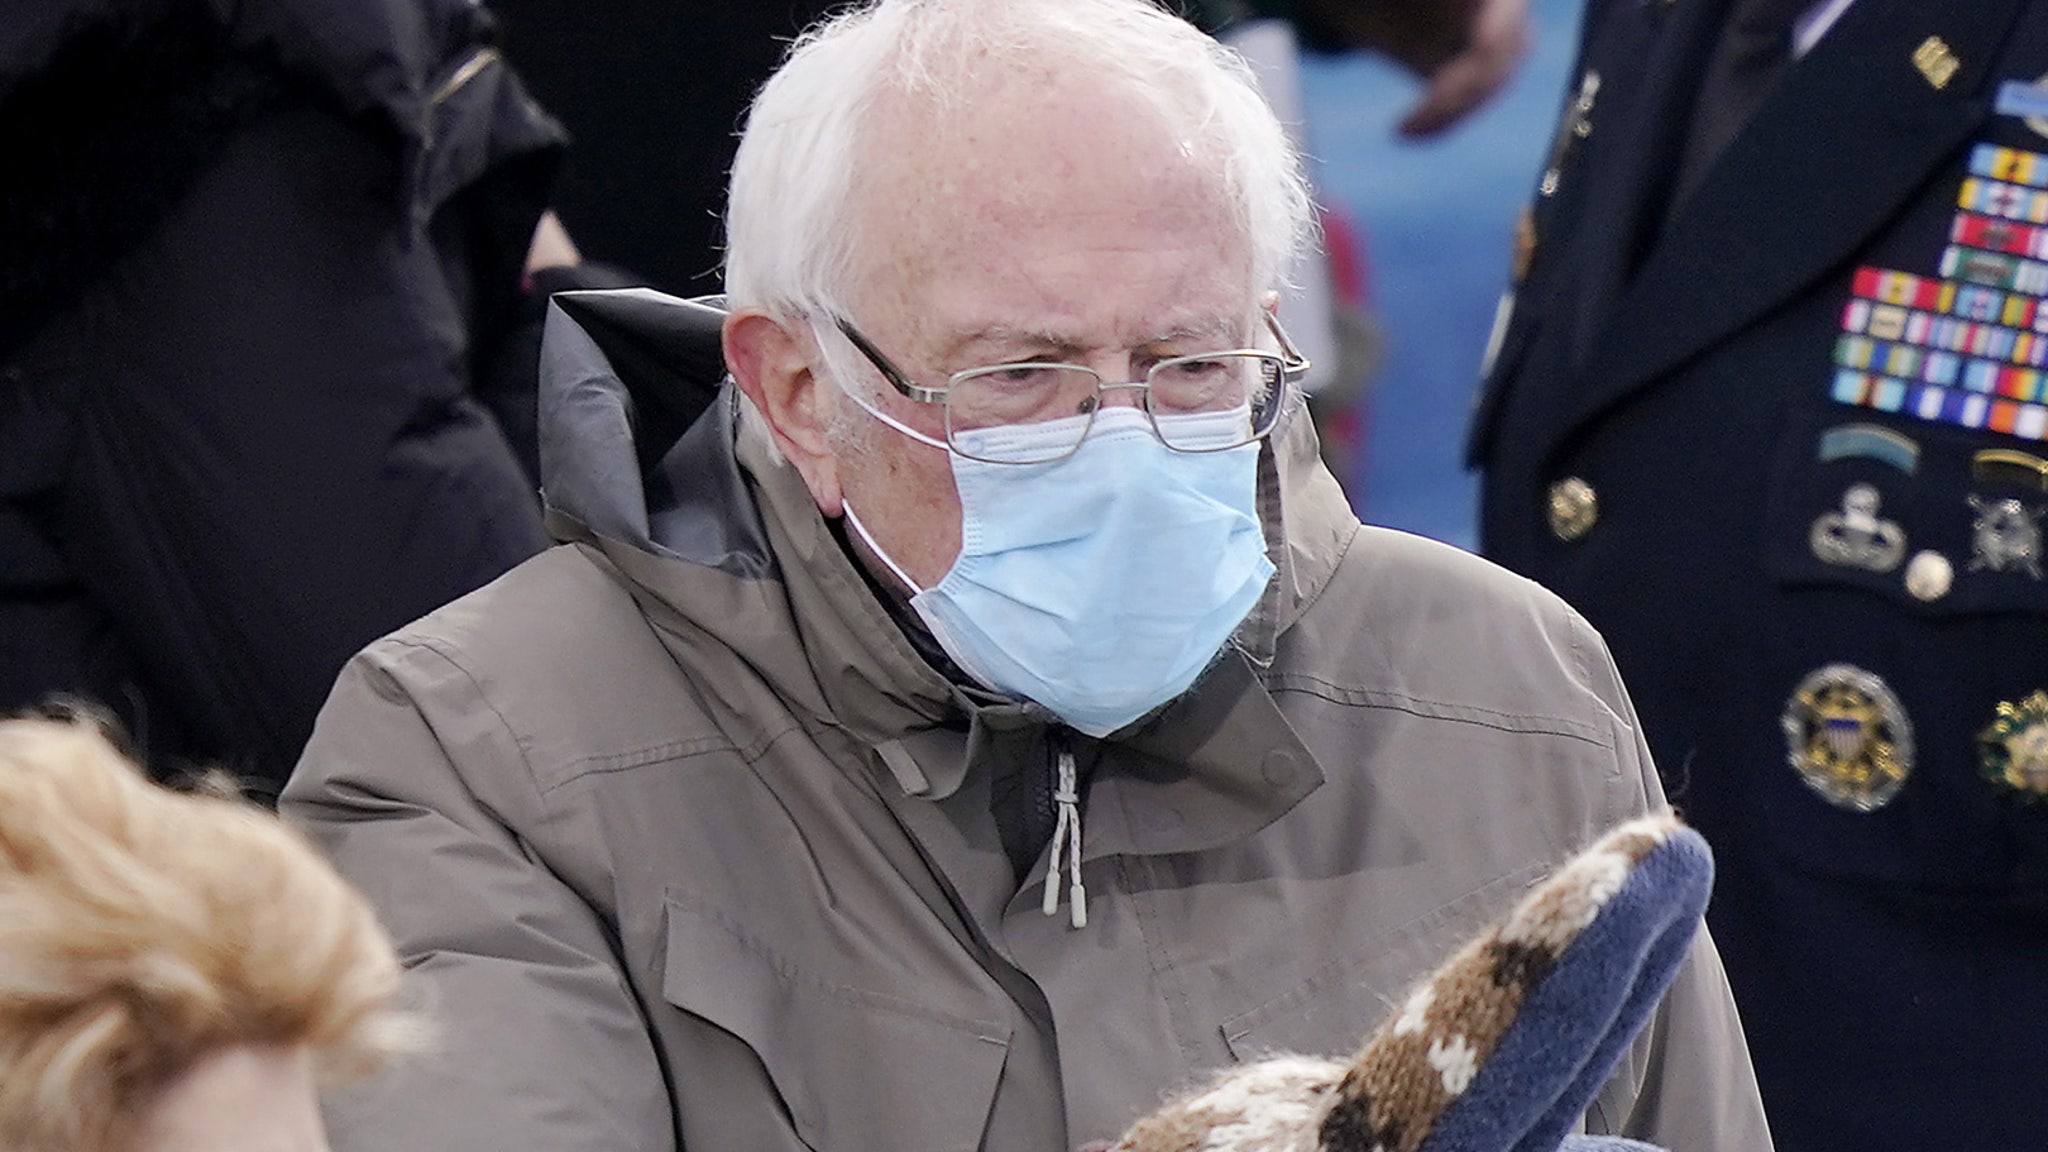 Bernie Sanders' Mitten Maker Says She's Received Thousands of Orders ...